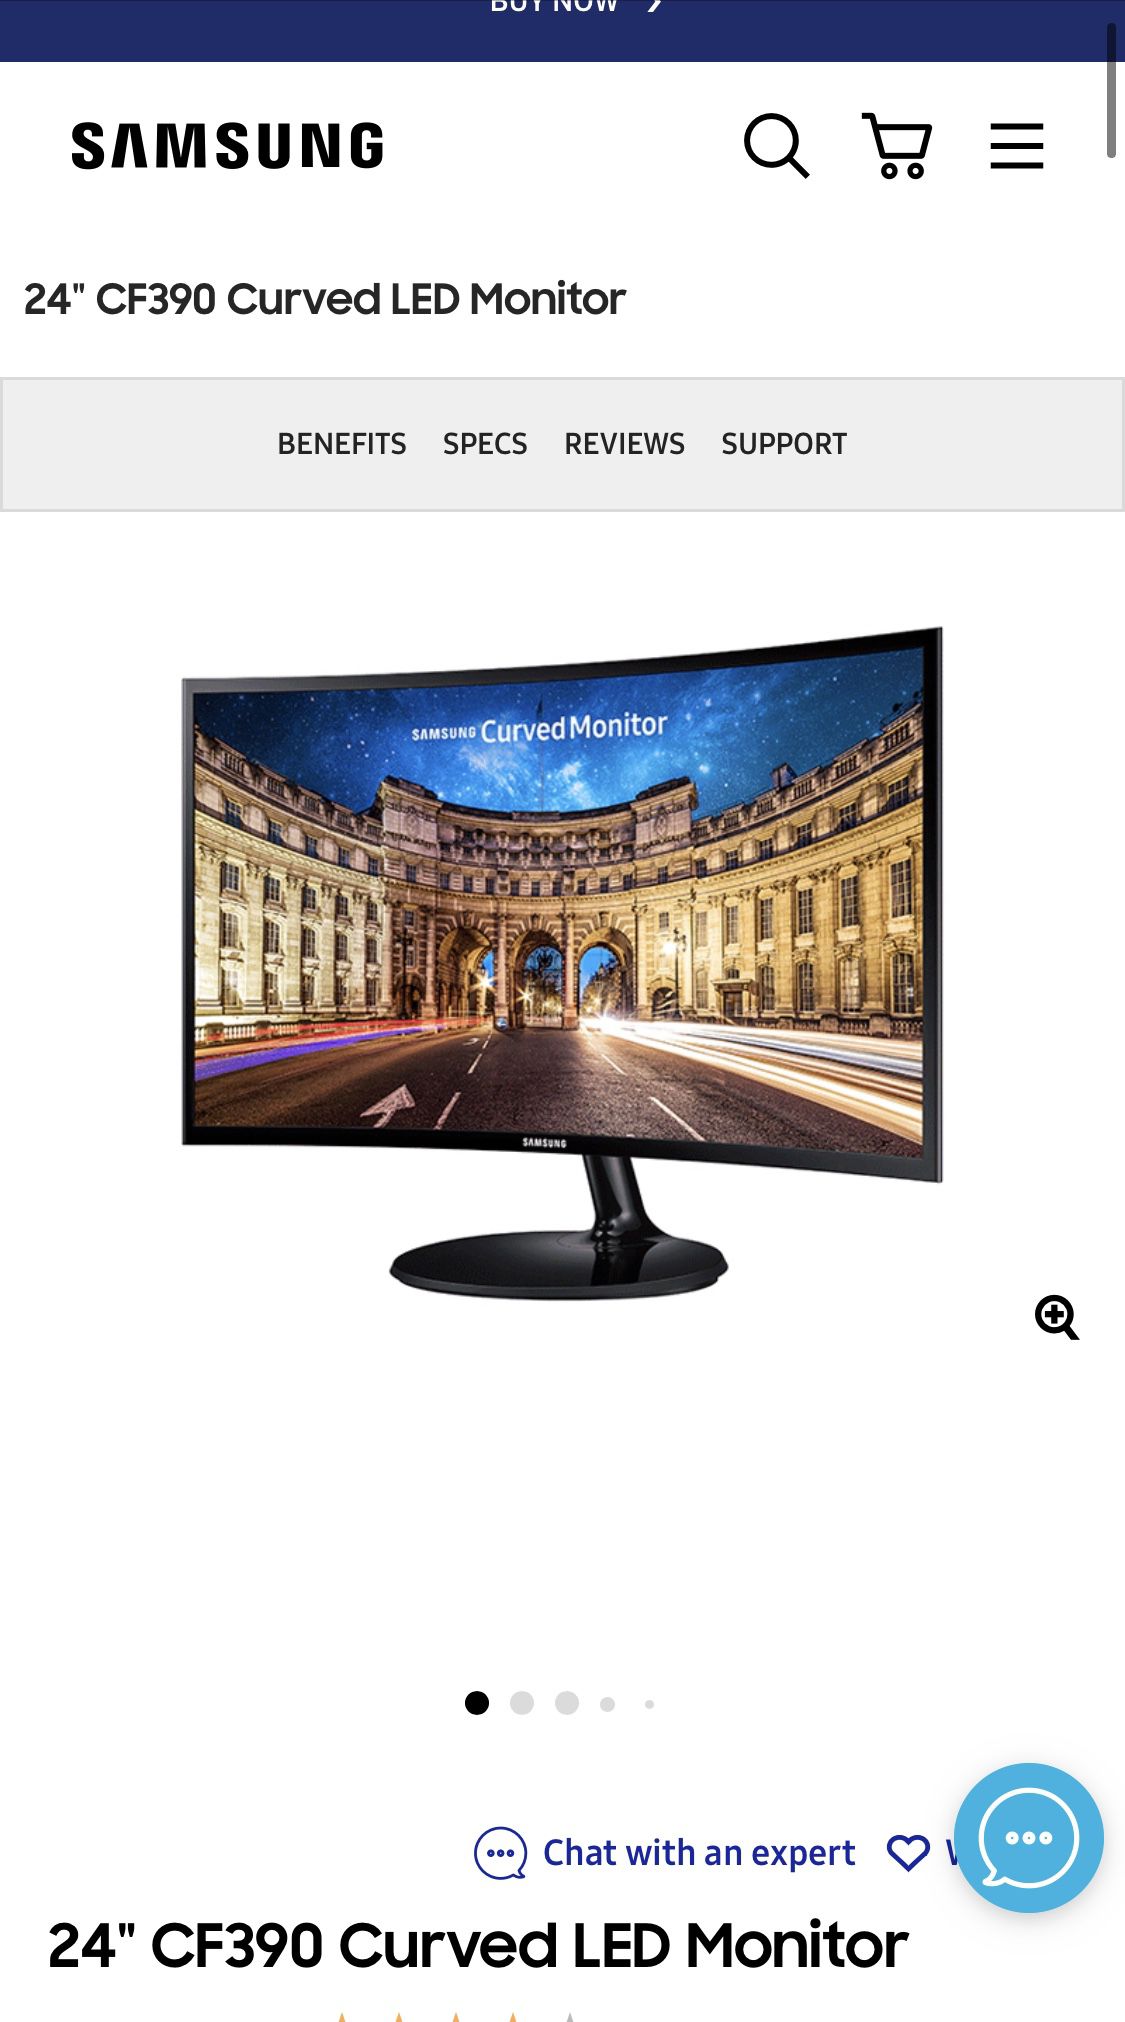 Samsung 24 Inch Monitor Curved